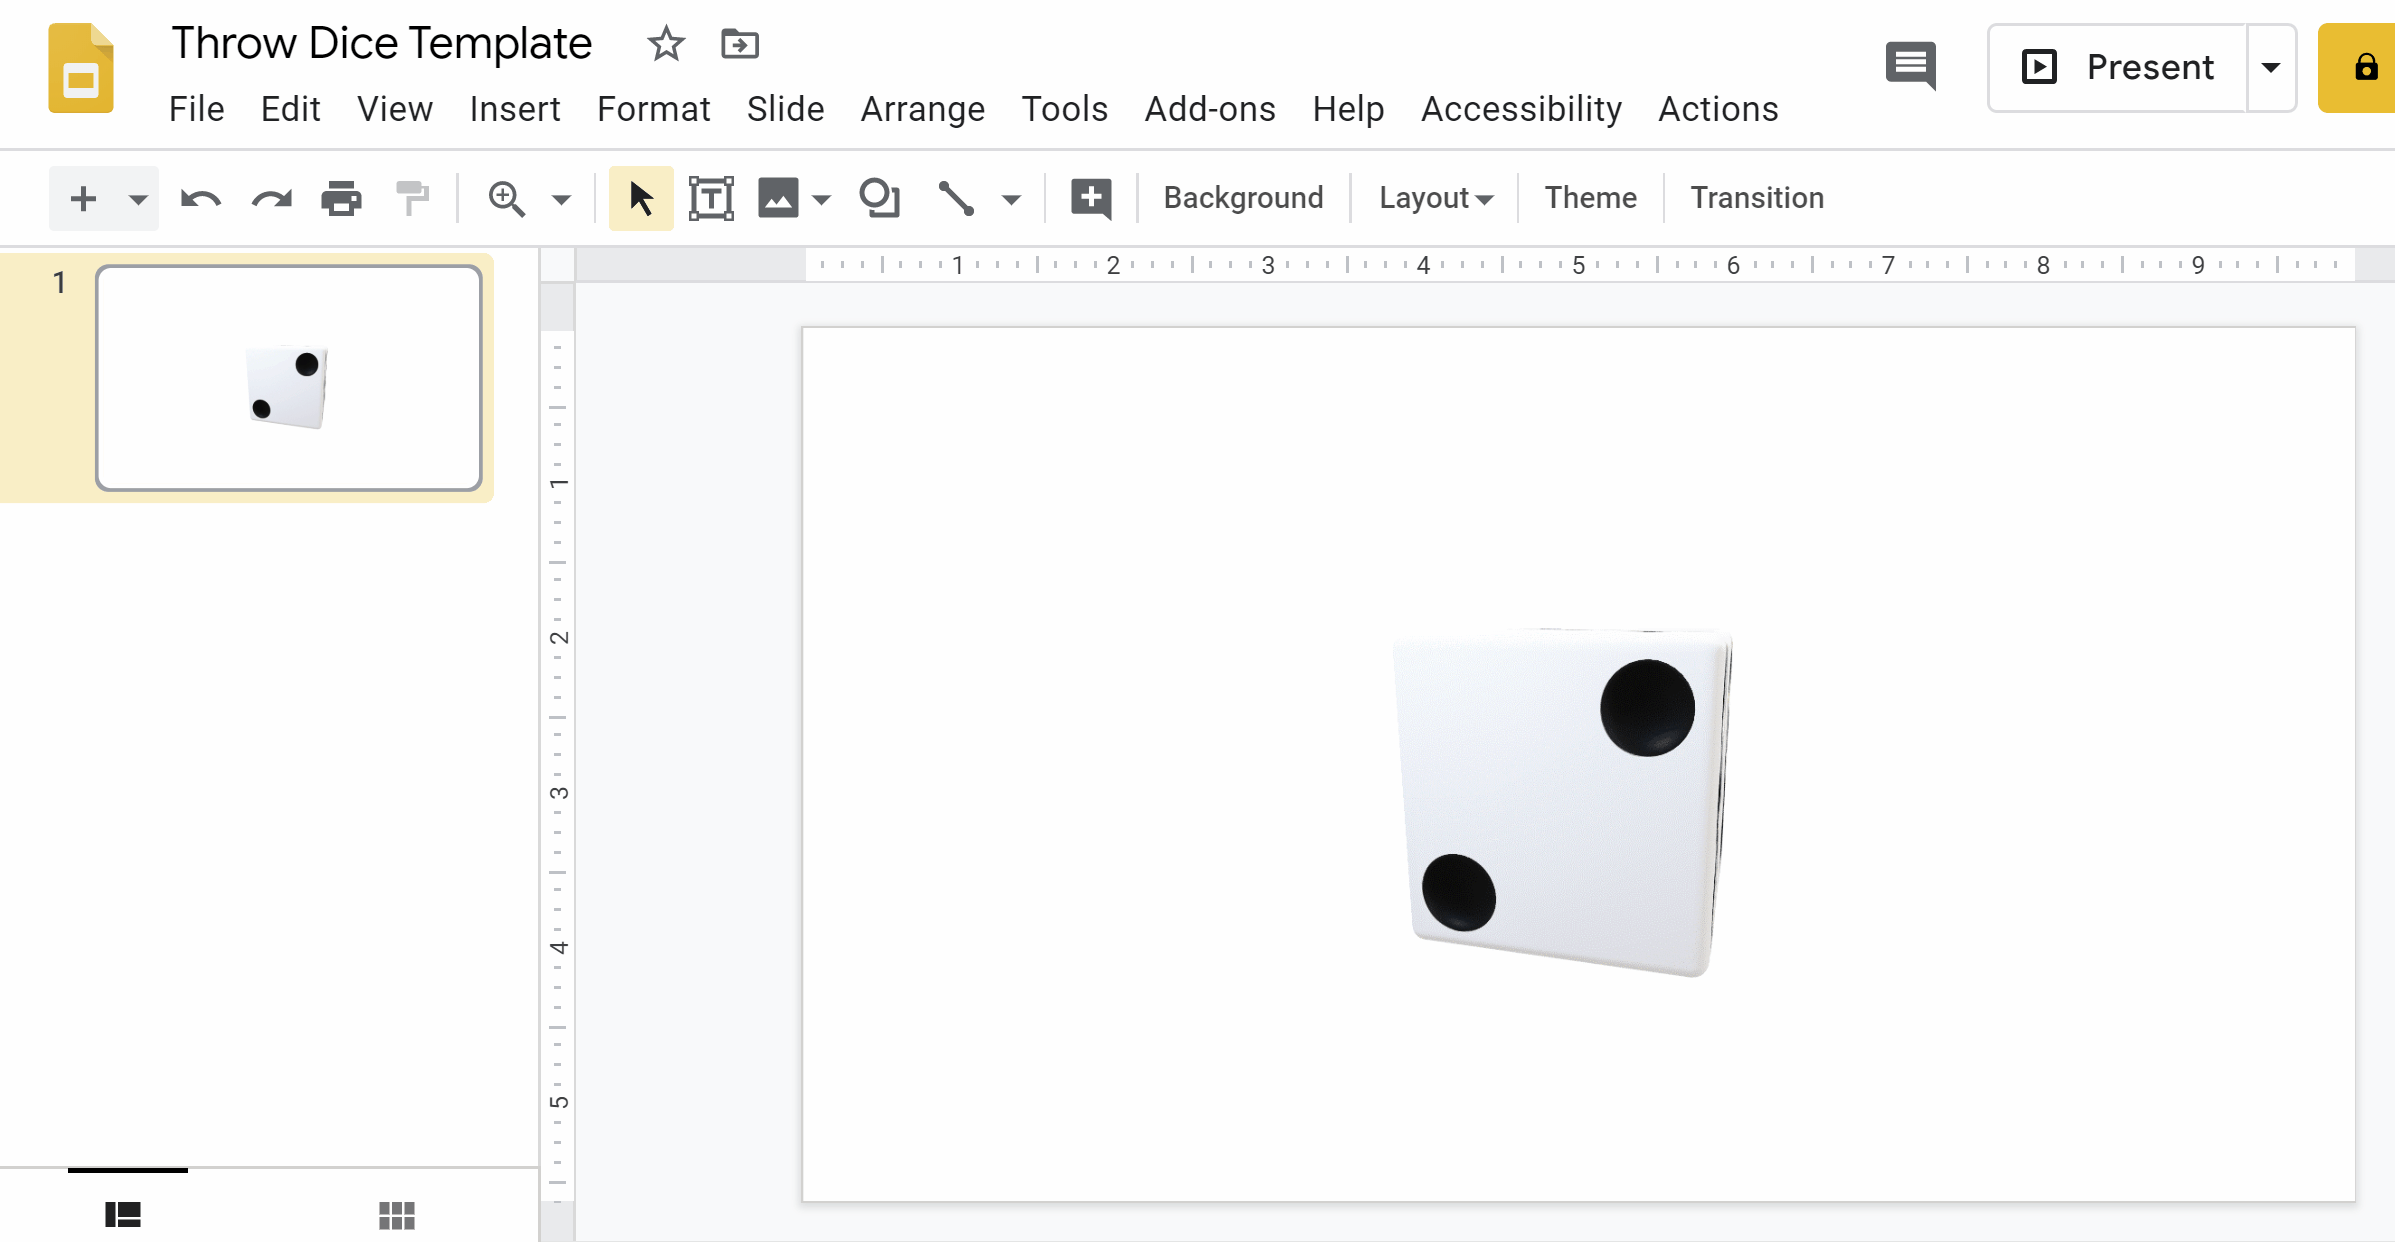 Triggering throwing a dice in Google Slides